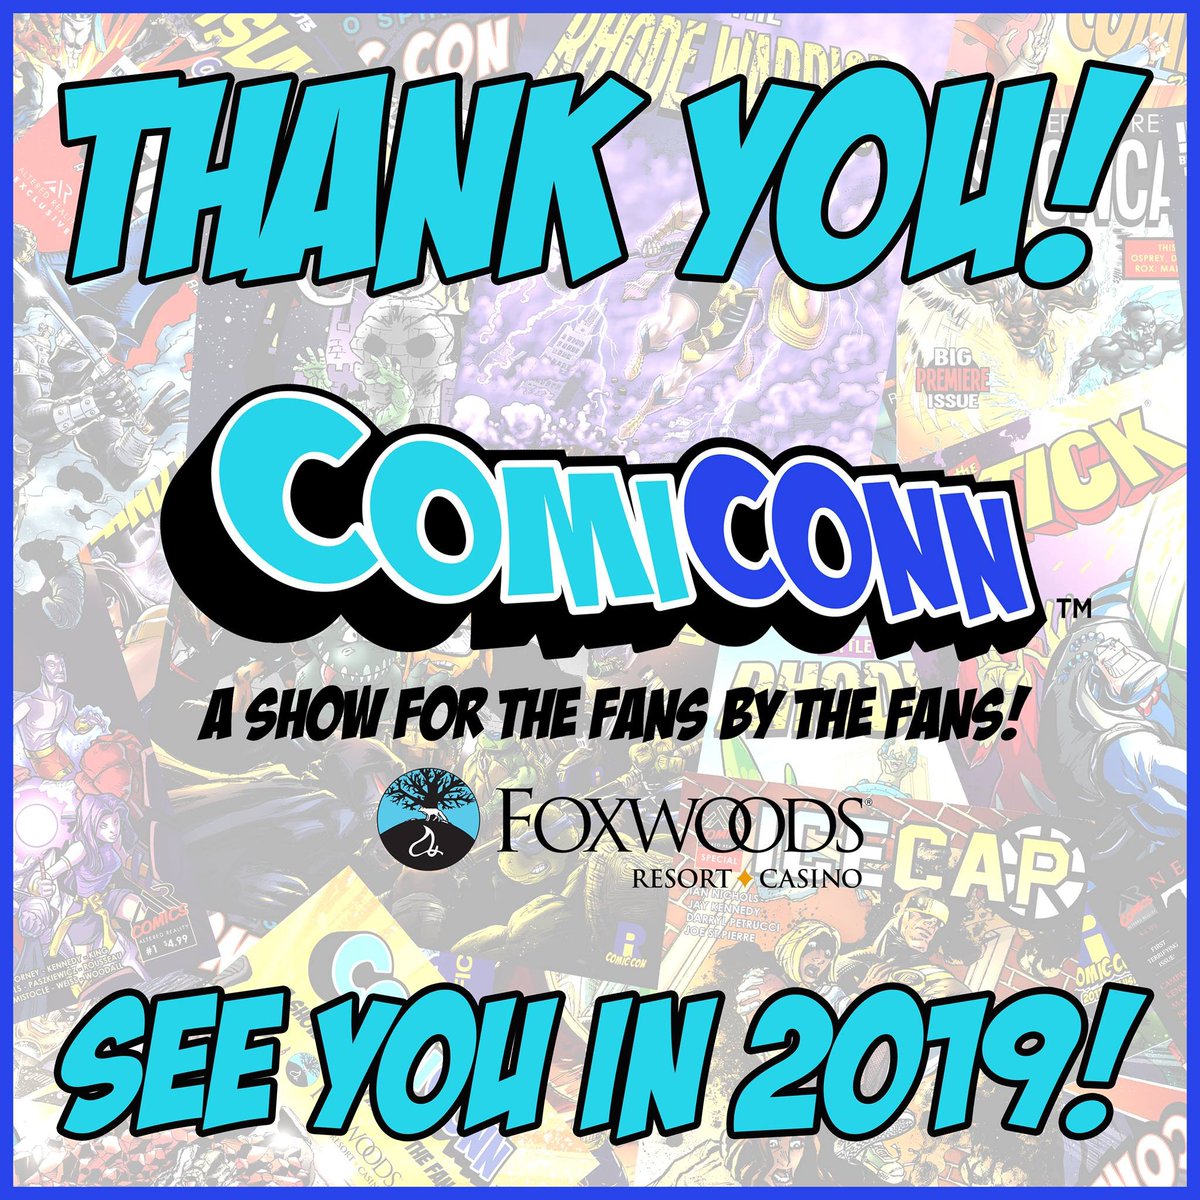 #ComiCONN2018 is in the books!

Thank you to our guests, artists, creators, vendors, volunteers, staff, @FoxwoodsCT, and fans for a successful 9th year!

#ComiCONN is and will always be #AShowForTheFansByTheFans!'

#FoxwoodsResortCasino #AlteredRealityEntertainment #Connecticut